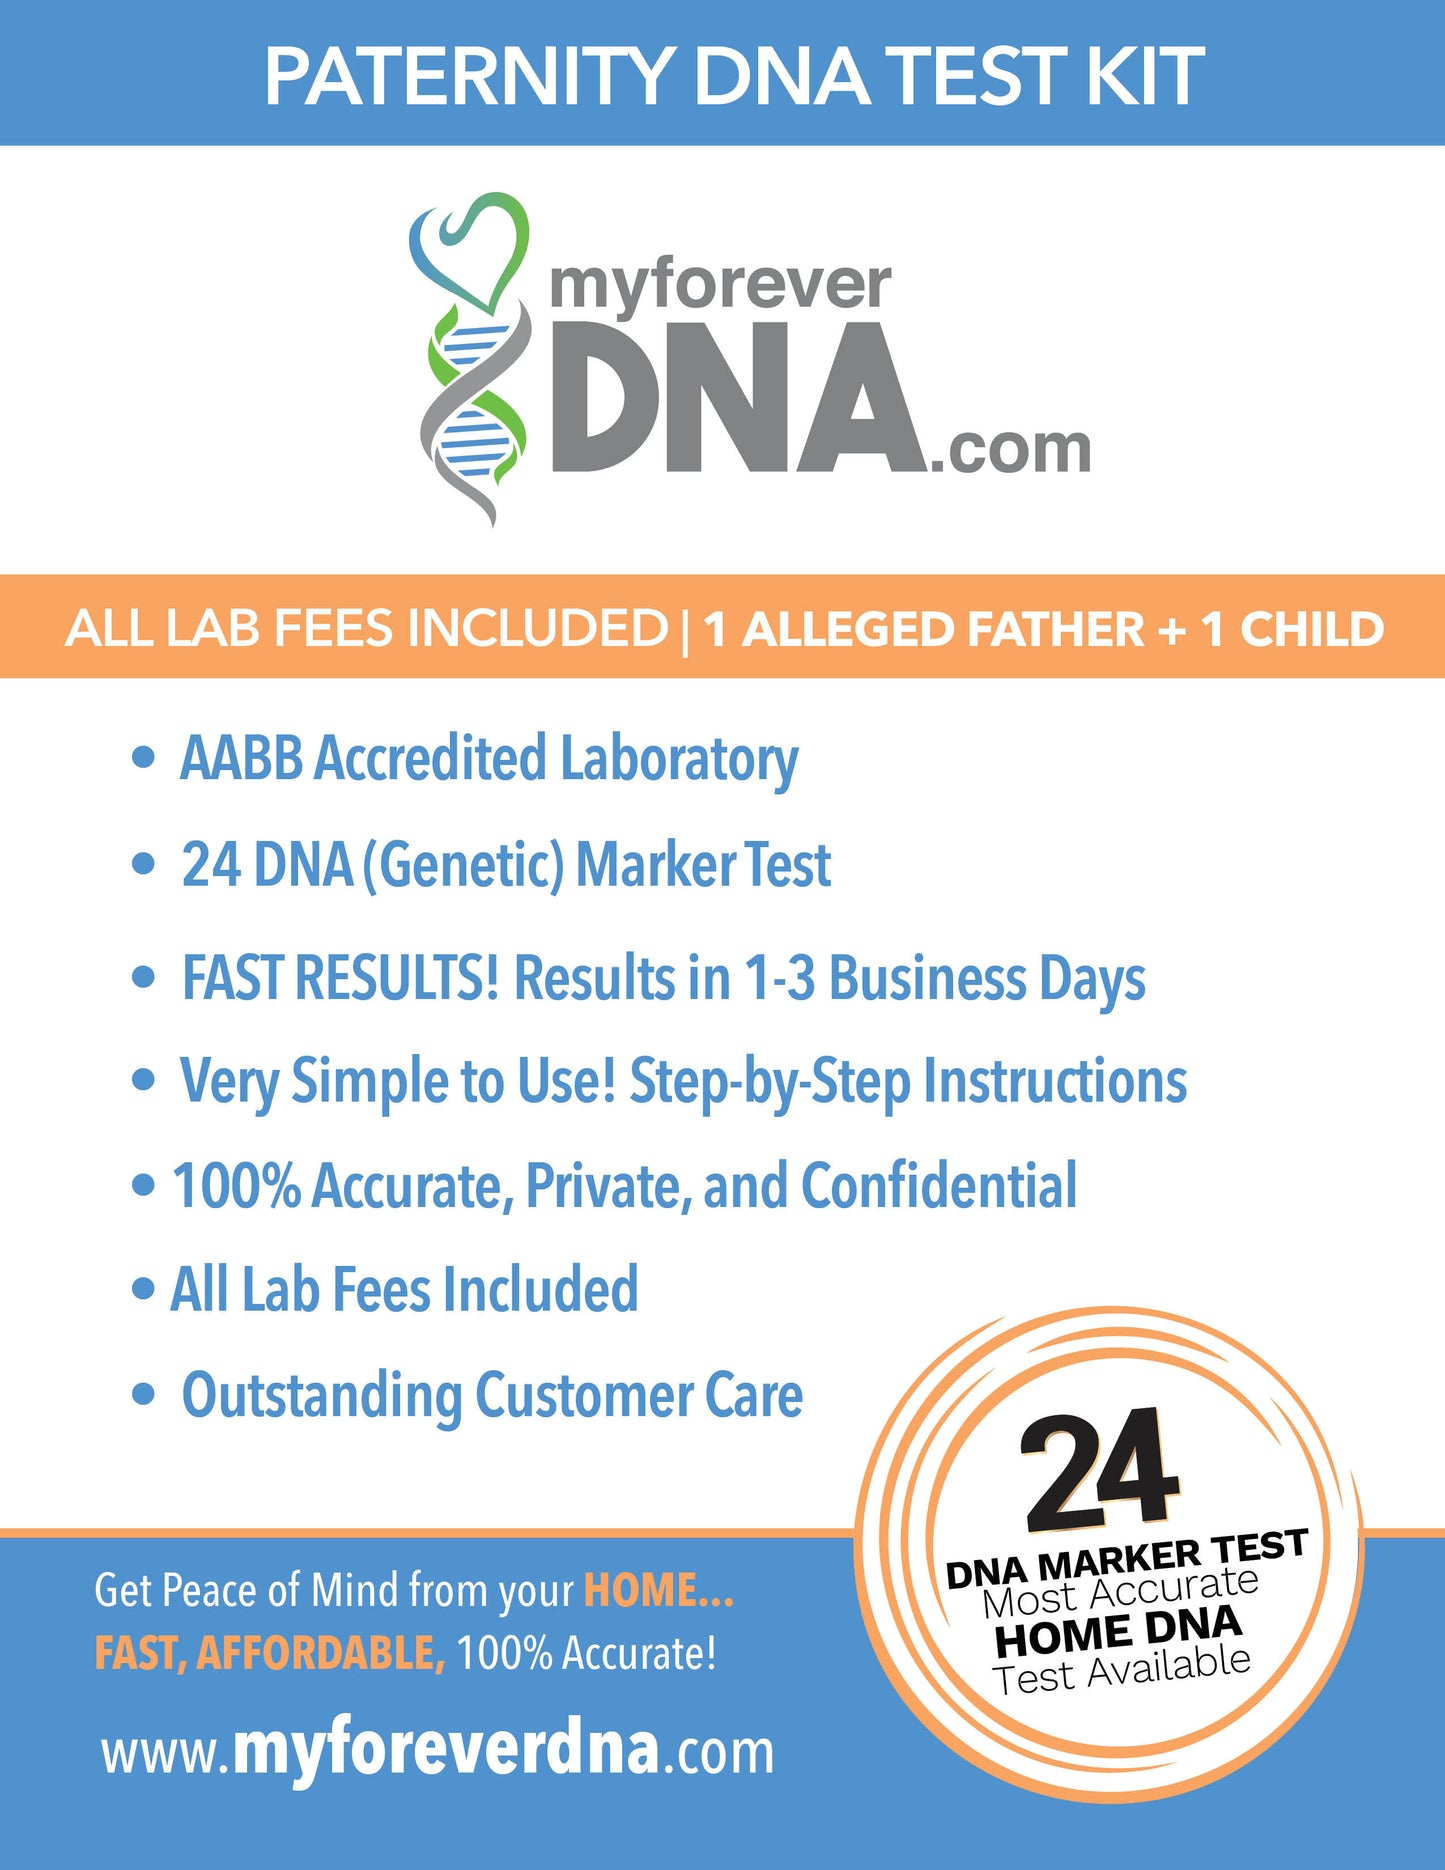 PATERNITY | 1 Alleged Father + 1 Child | Complete Home DNA Test Kit | All Lab Fees & Shipping Included